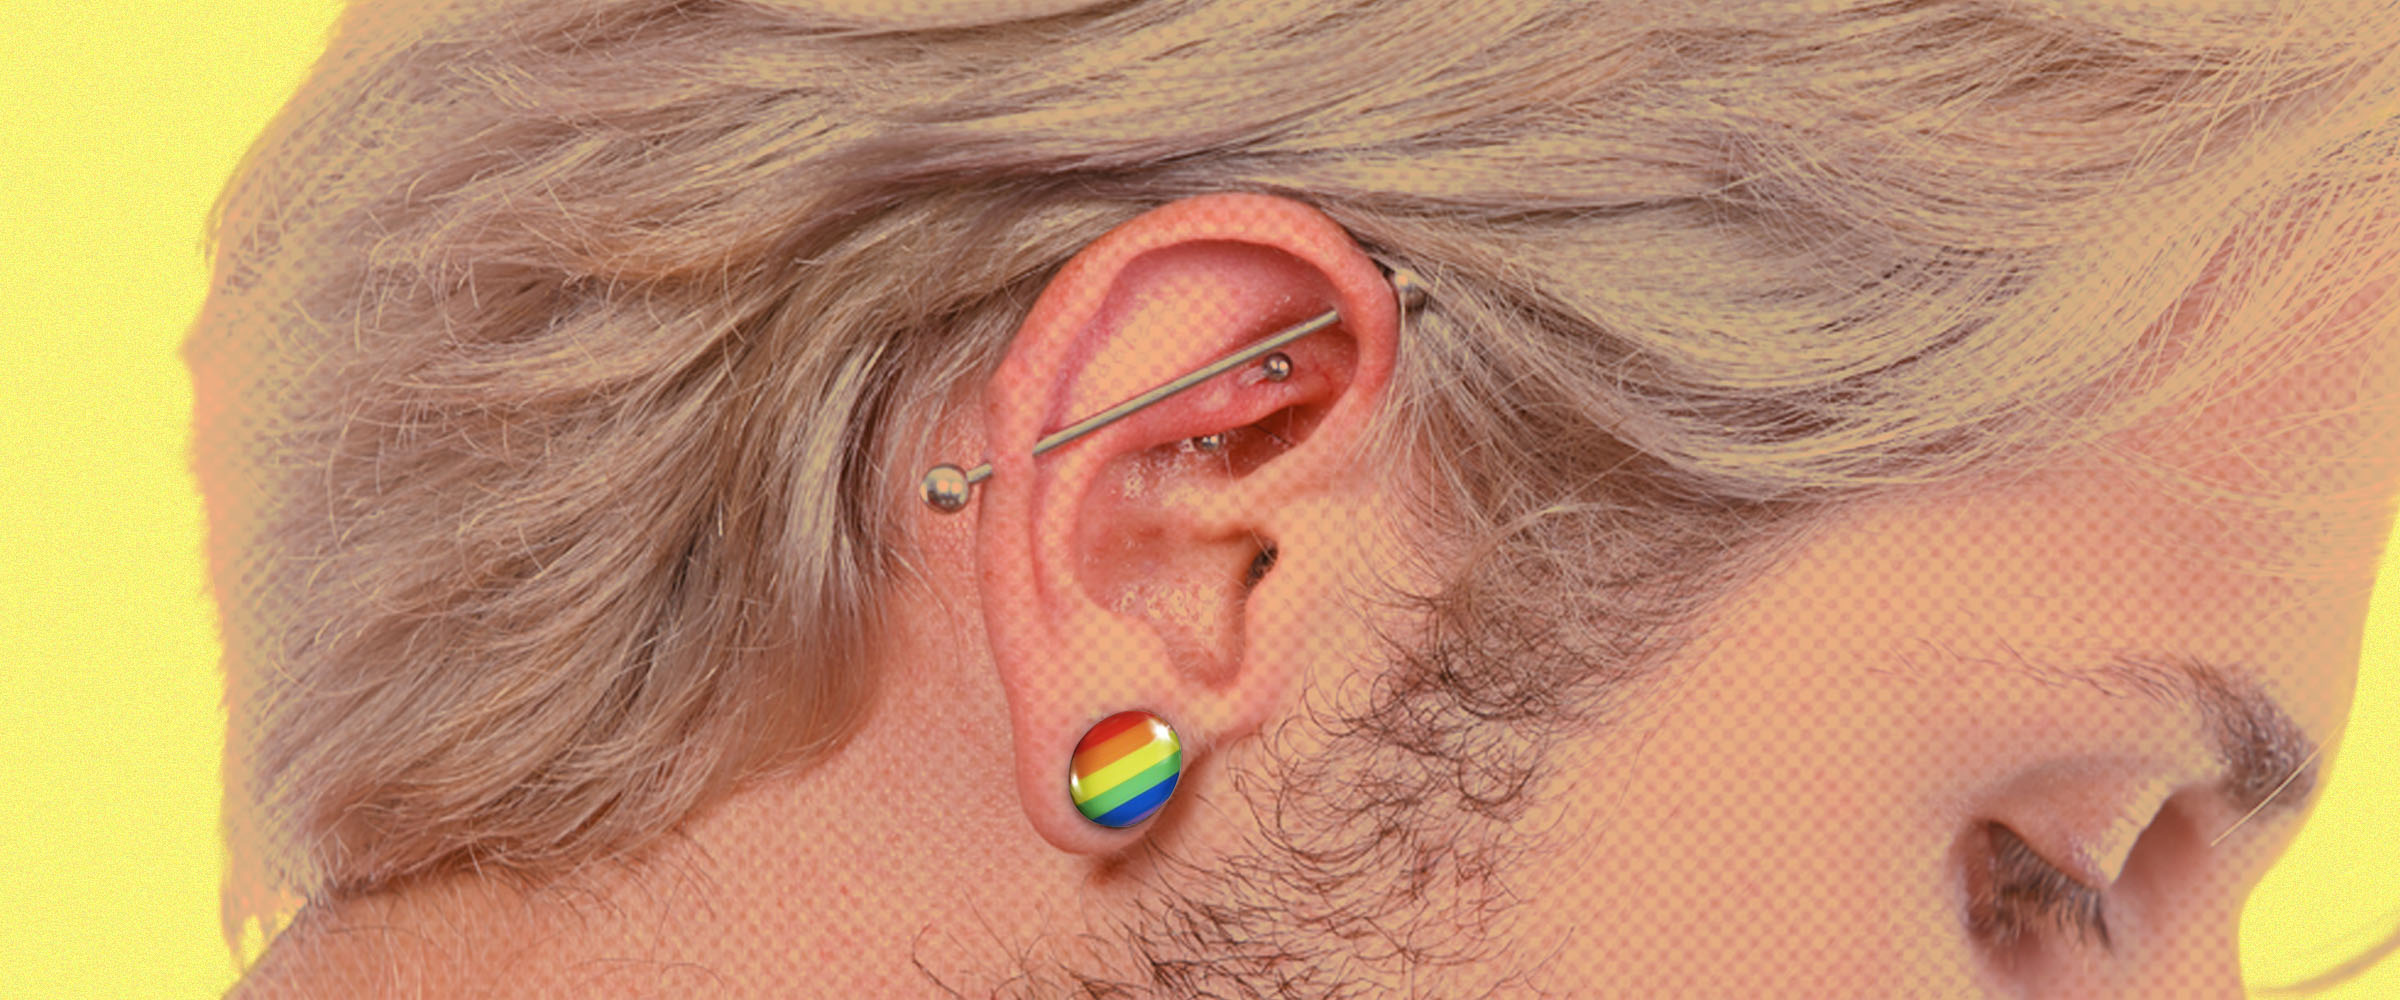 Piercing gay ear which is side for Which side